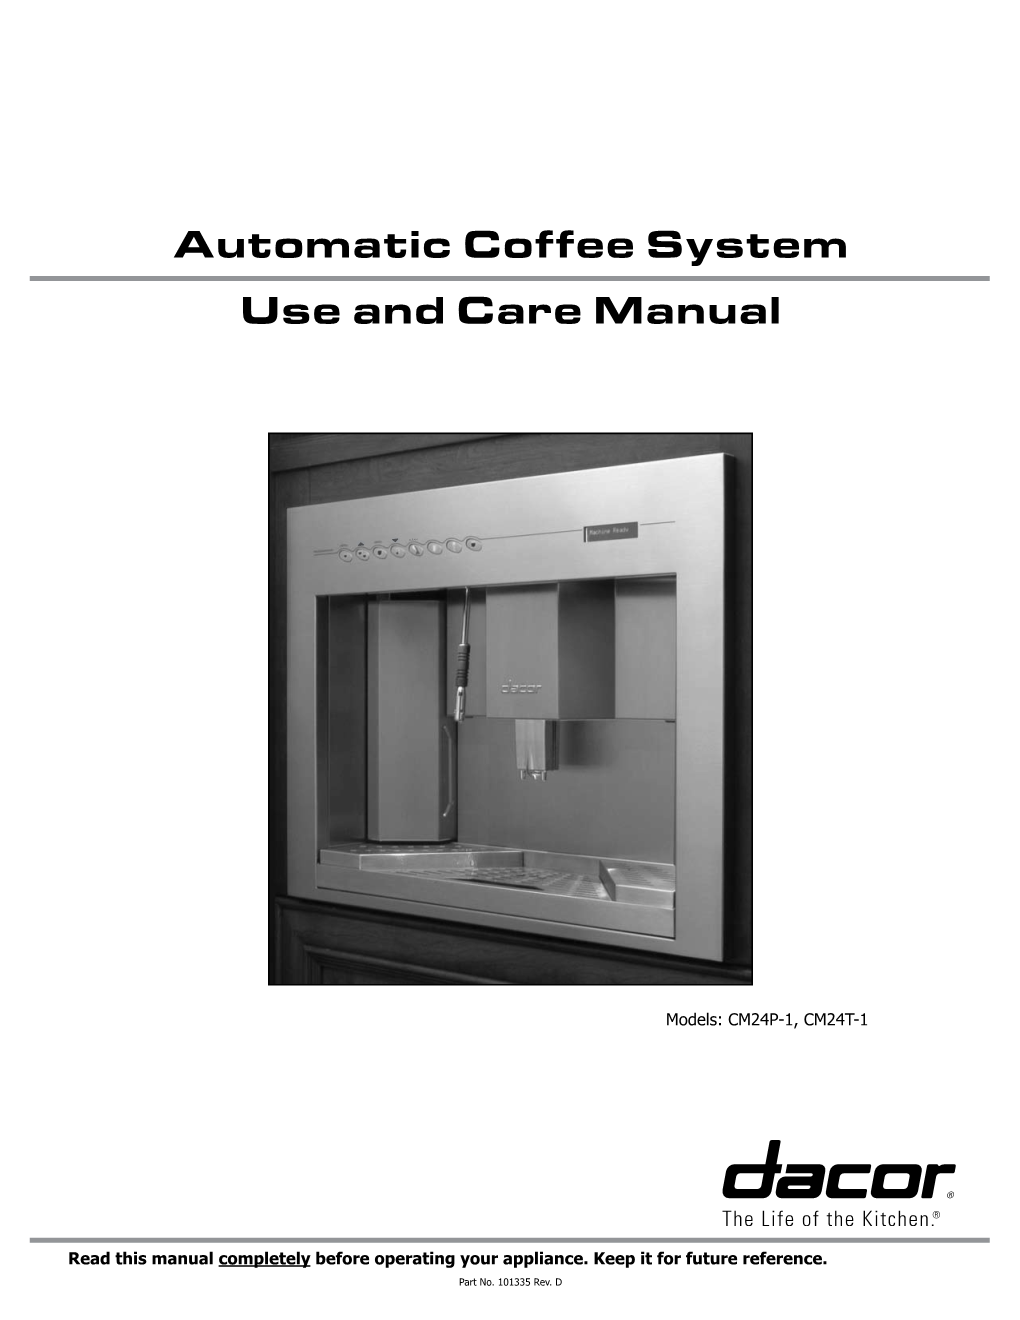 Automatic Coffee System Use and Care Manual